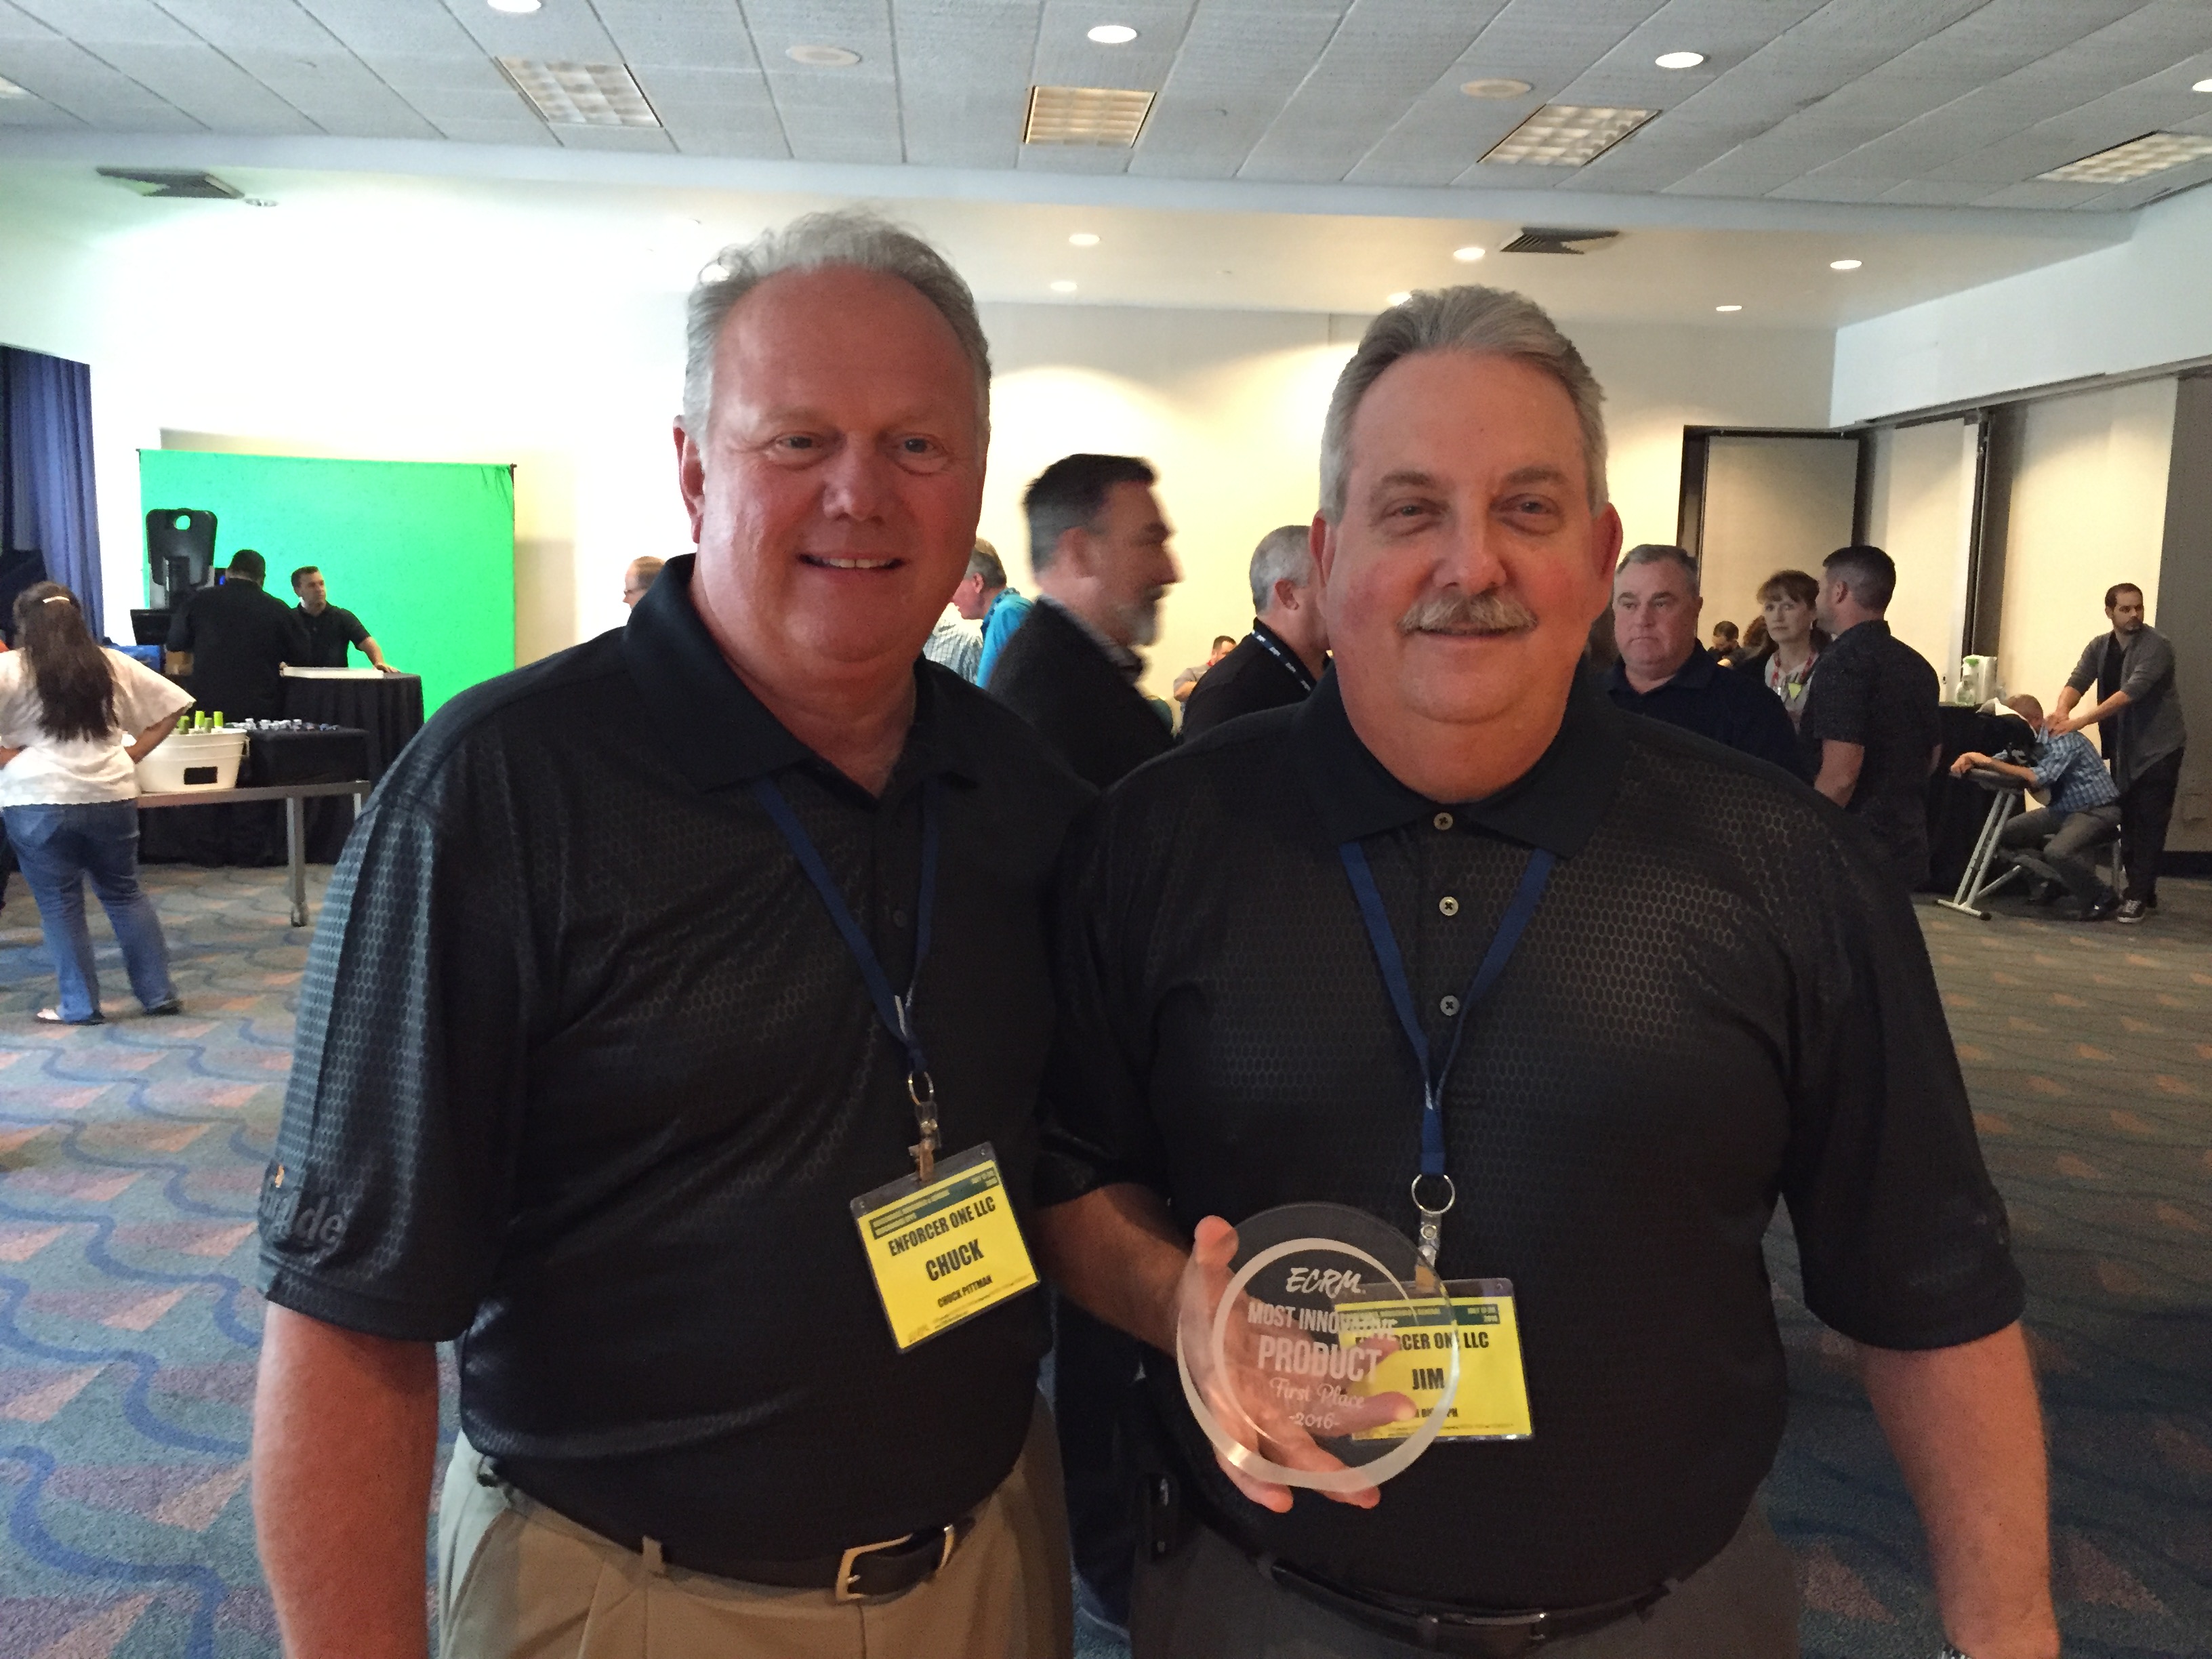 1st Place Winner Enforcer One. Pictured left to right; Chuck Pittman and Jim Rudolph.